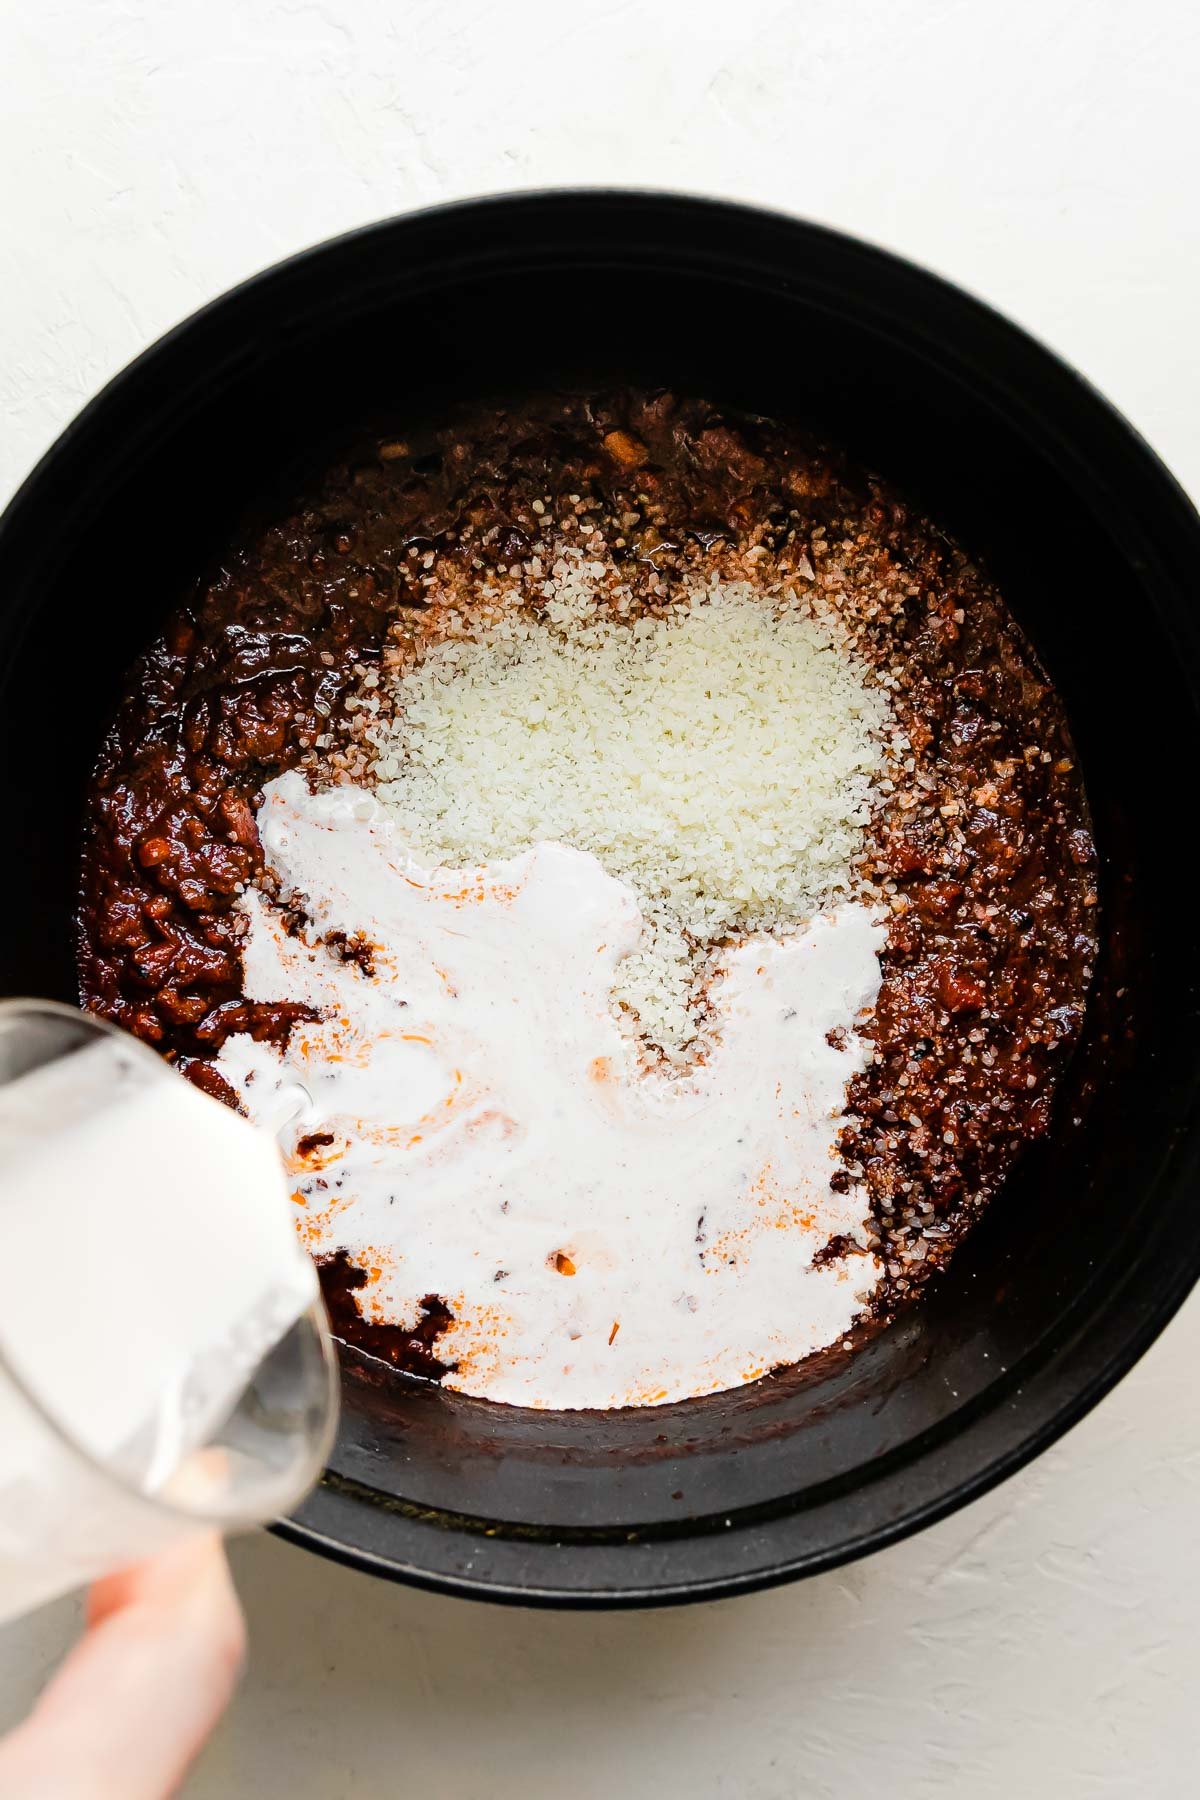 Grated parmesan and bolognese sauce fill a large white Staub cocotte that sits atop a creamy white textured surface. A woman's hand holds a glass of heavy cream above the cocotte as it is slowly poured into the bolognese sauce.